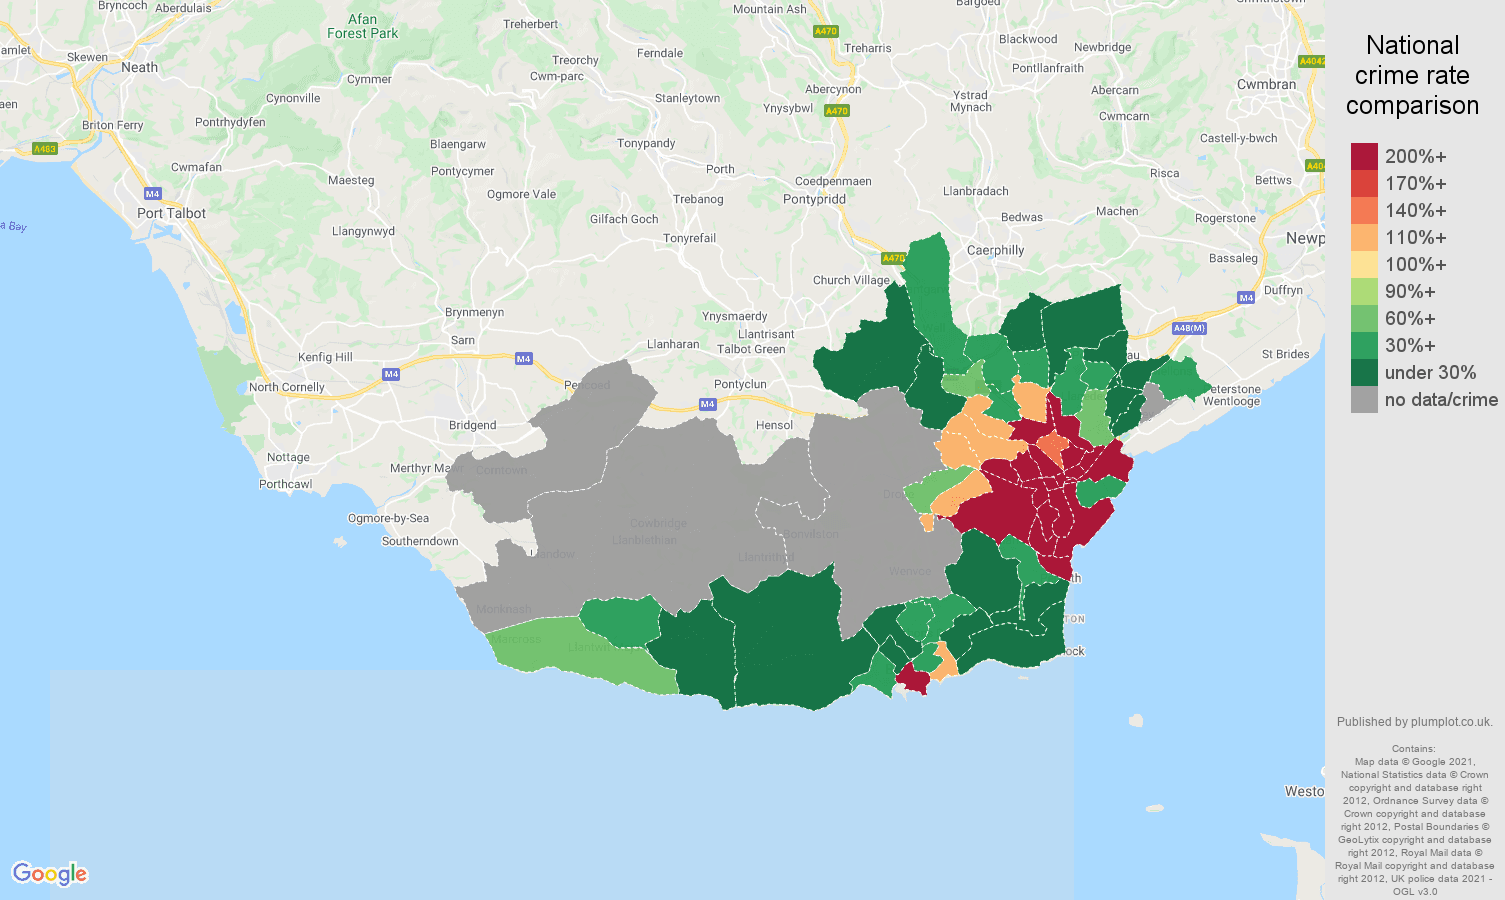 South Glamorgan bicycle theft crime rate comparison map